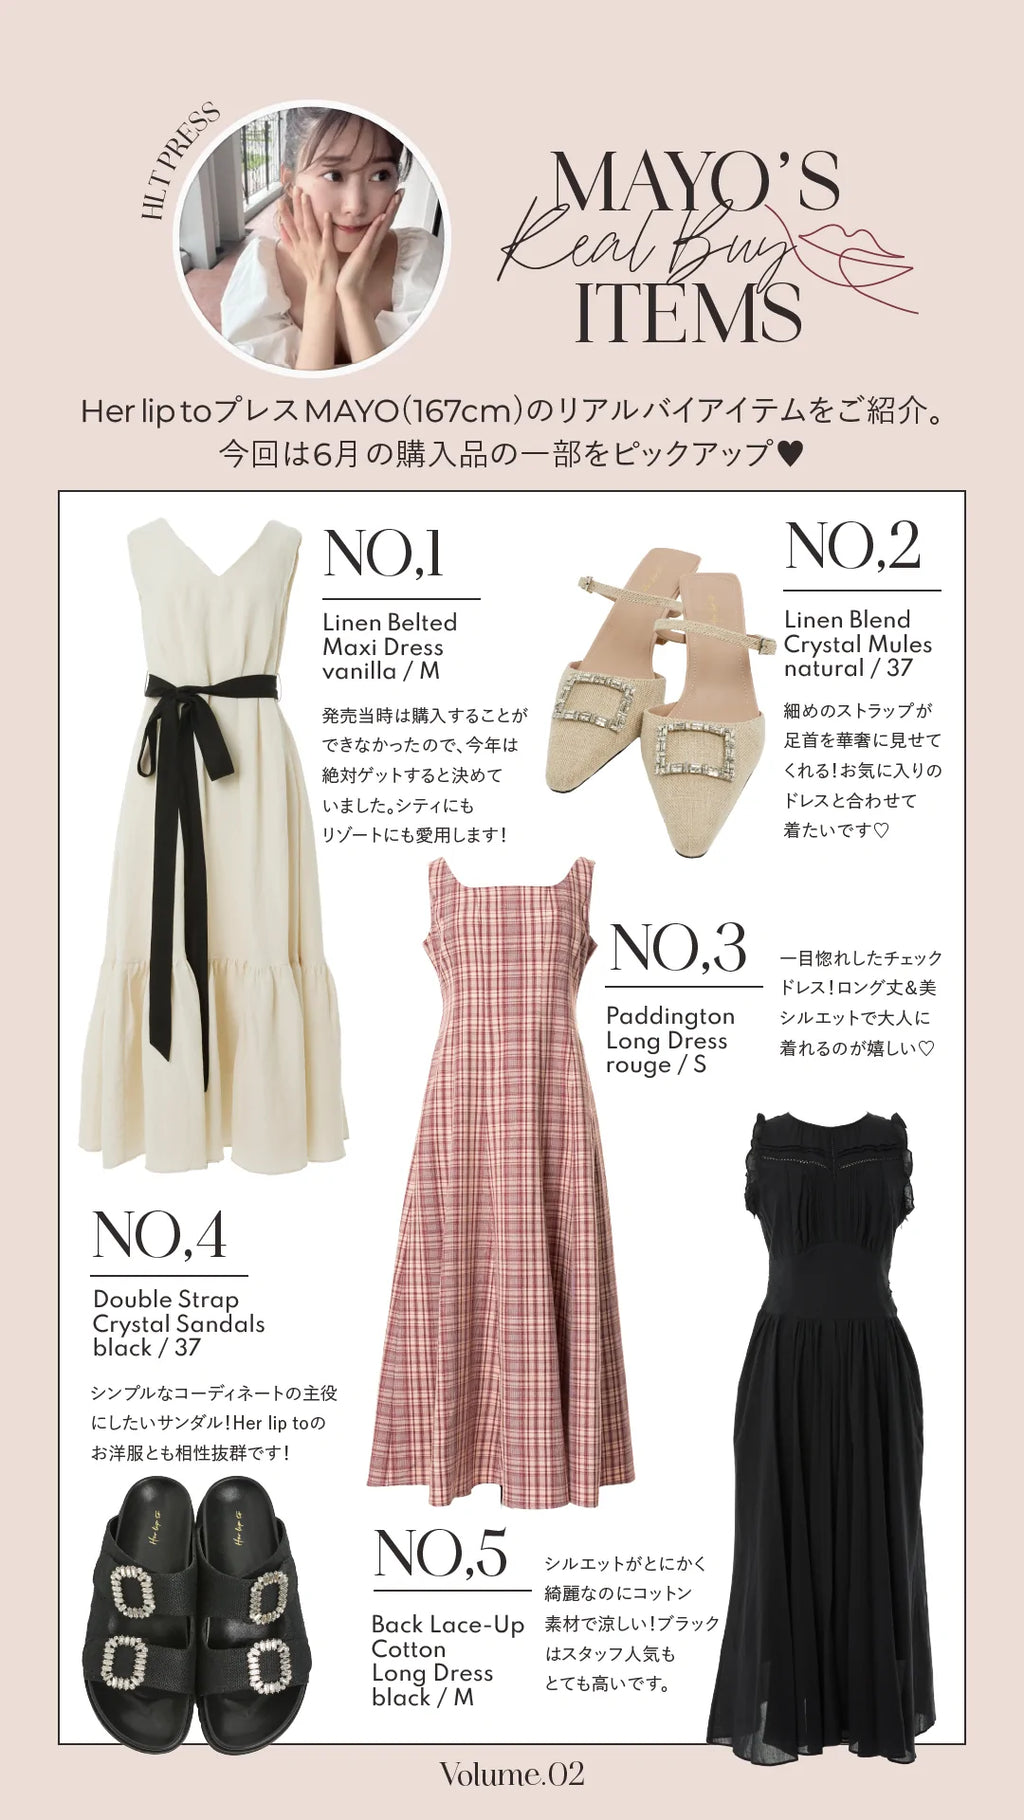 Le Negresco Floral Dress Her lip to - ロングワンピース